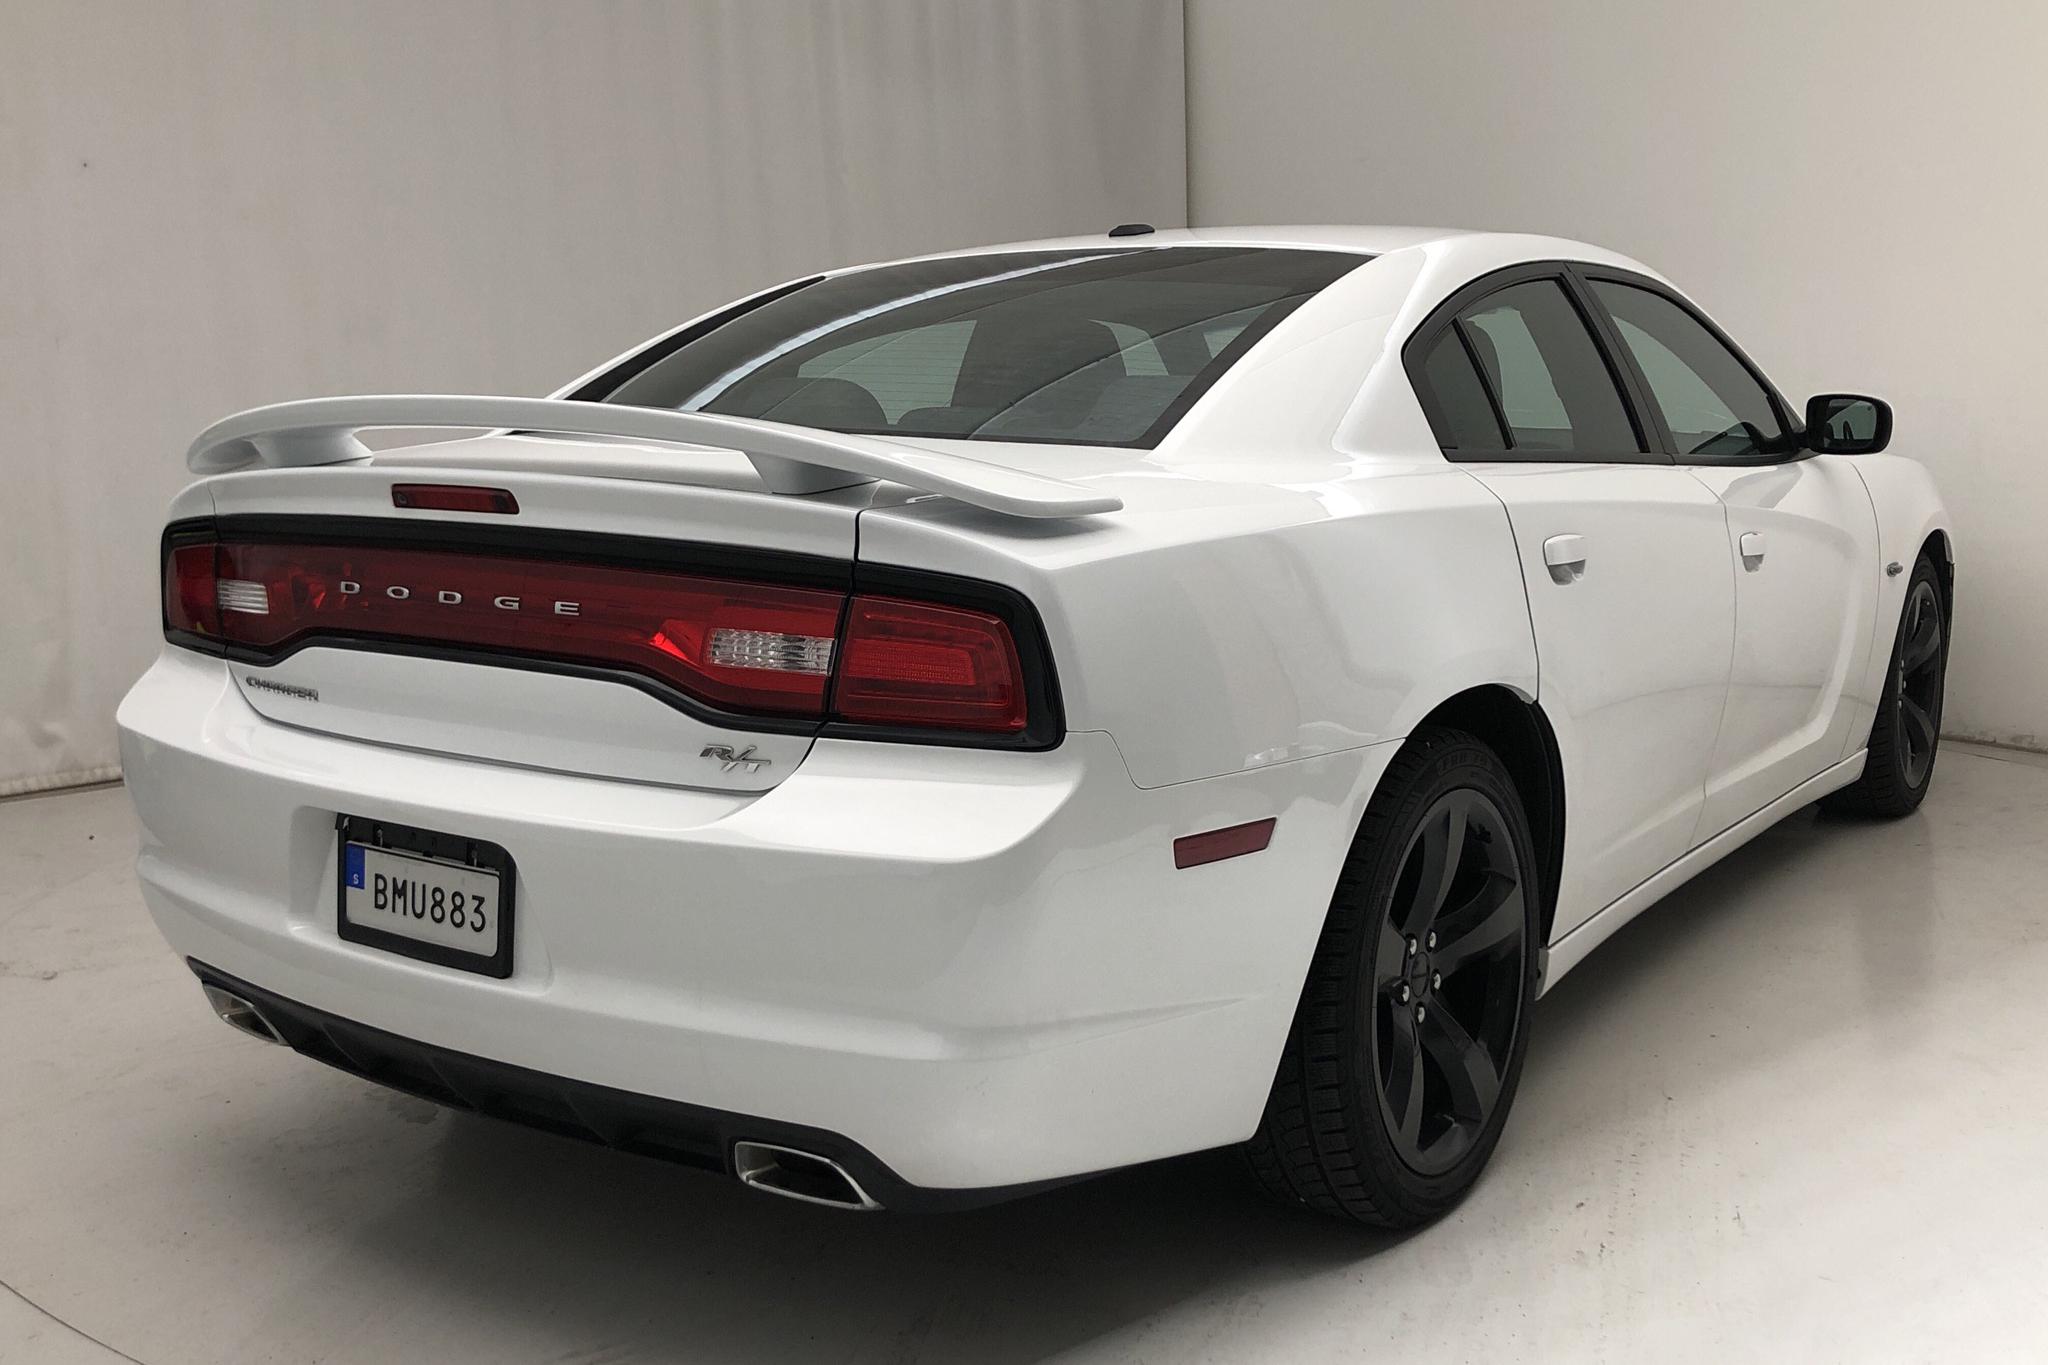 Dodge Charger 5.7 V8 (375hk) - 74 770 km - Automatic - white - 2014